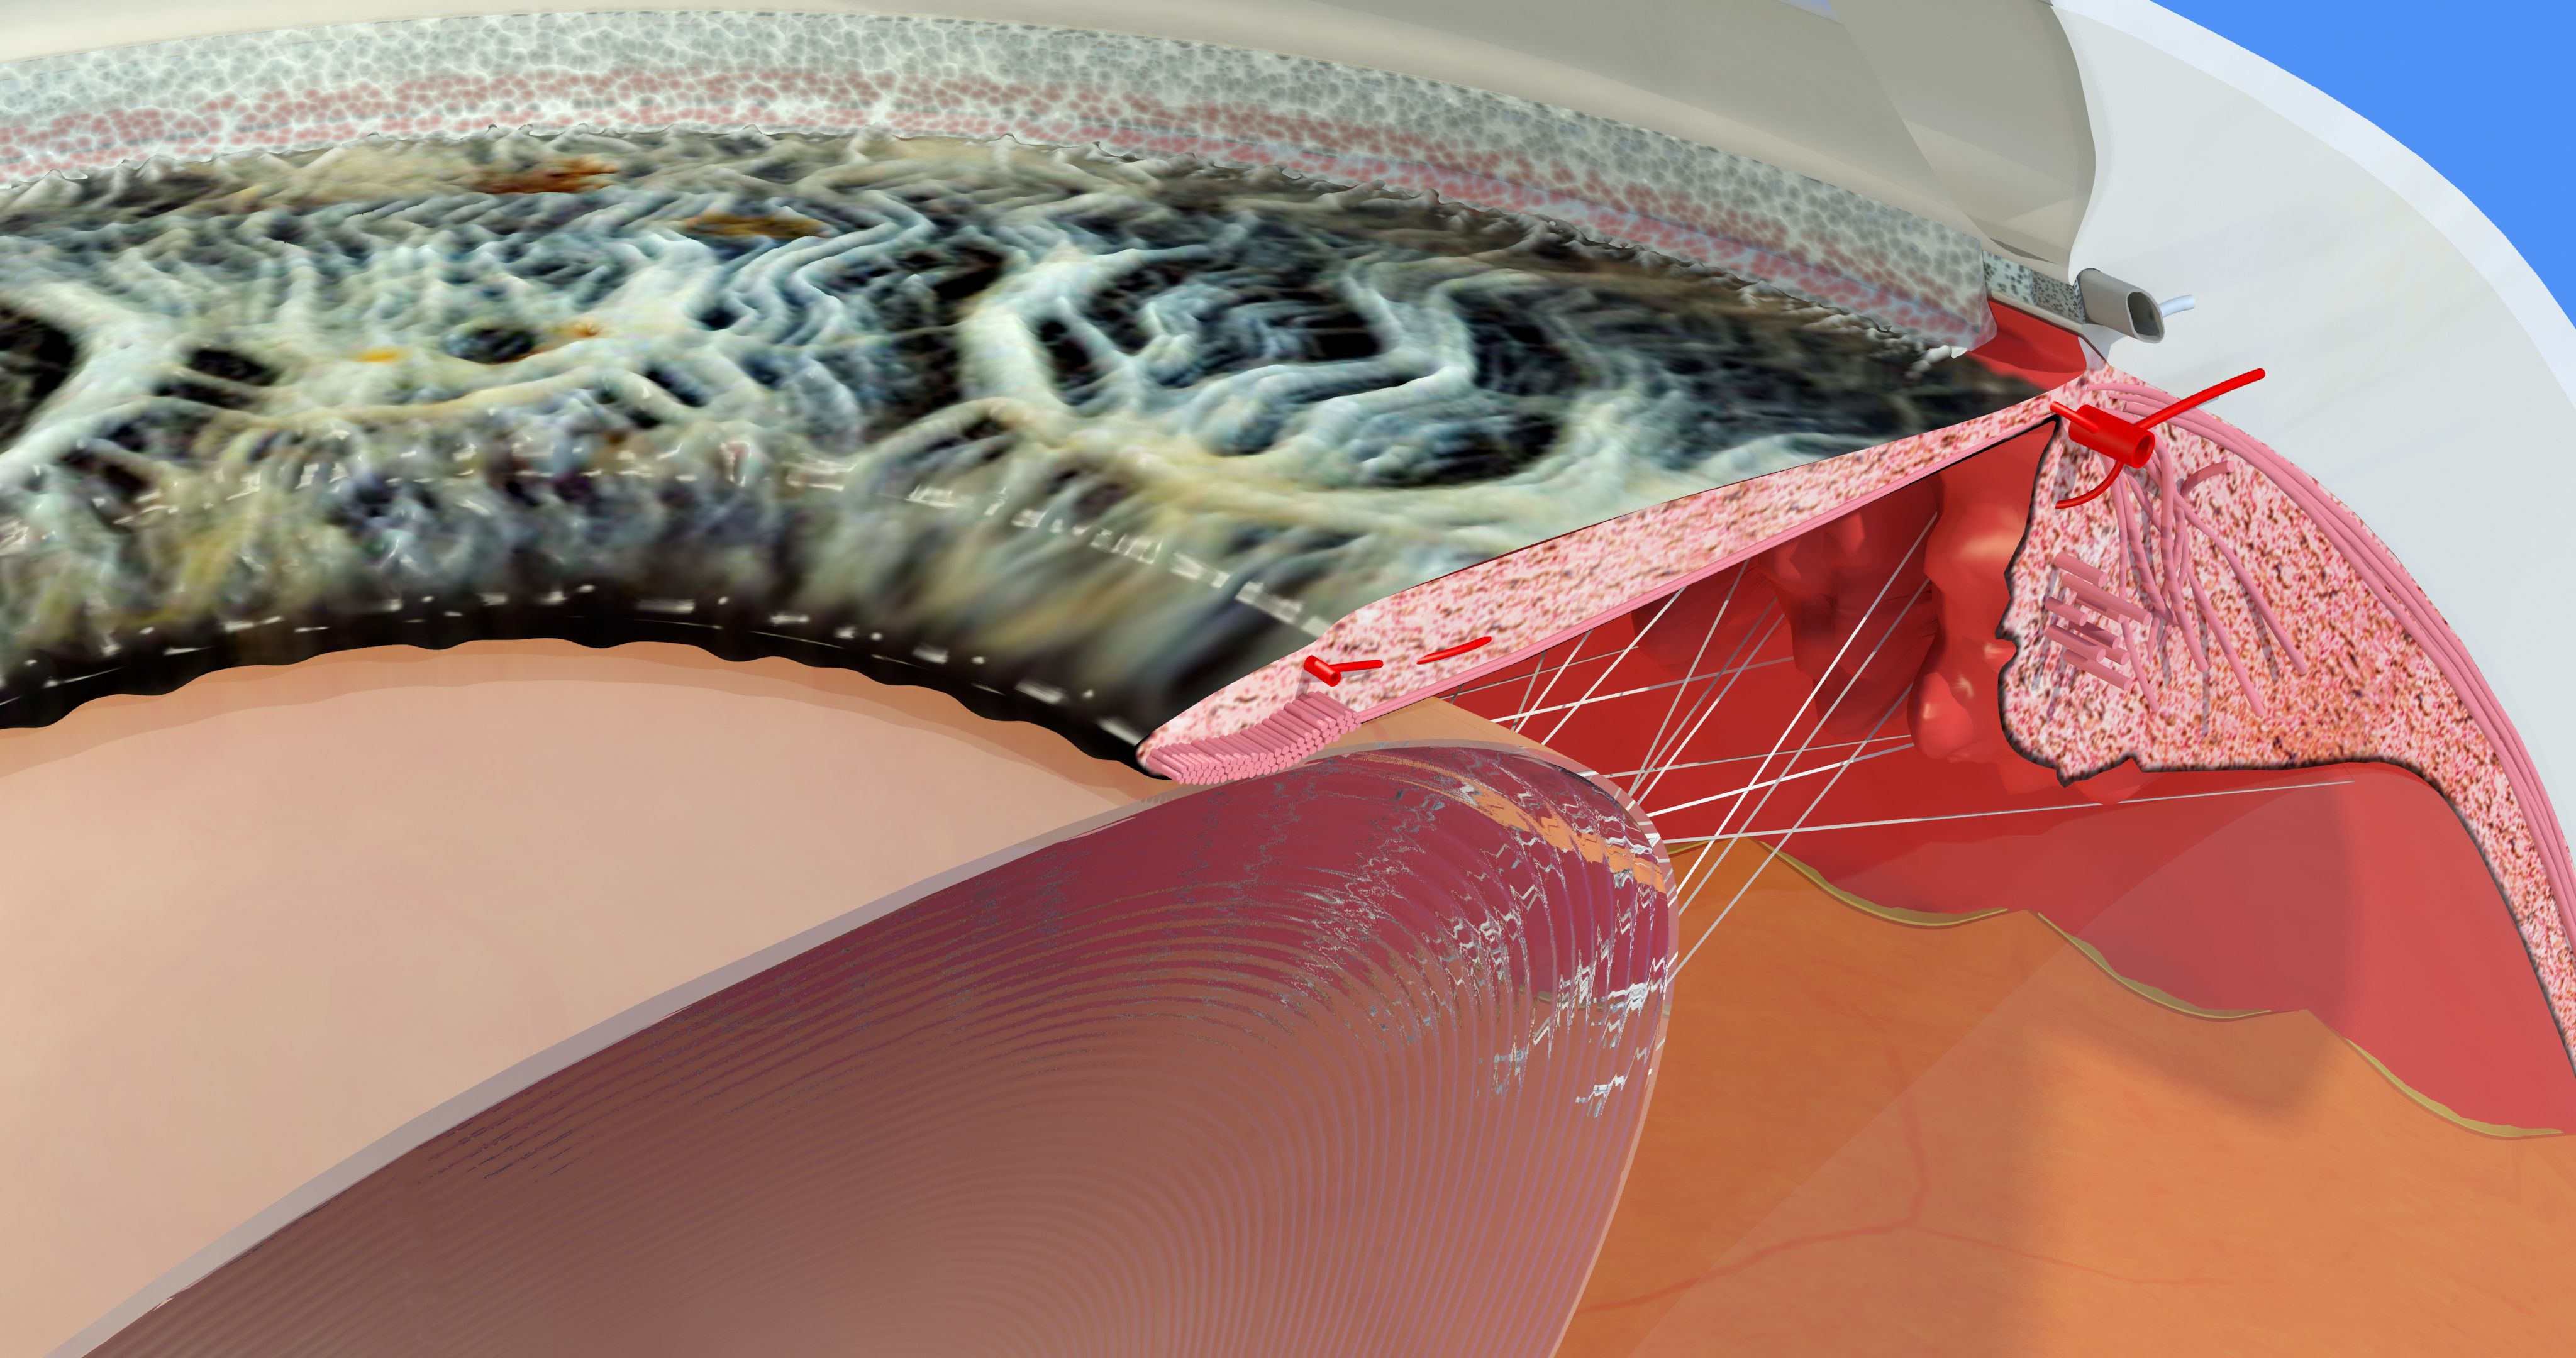 The author provides an overview of how having a better understanding of the anatomy and physiology of Schlemm canal, in addition to considering the clinical details revealed by slit lamp examination and gonioscopy, can help to improve the results of trabecular stent surgery. (Image courtesy of ©Belus / stock.adobe.com)